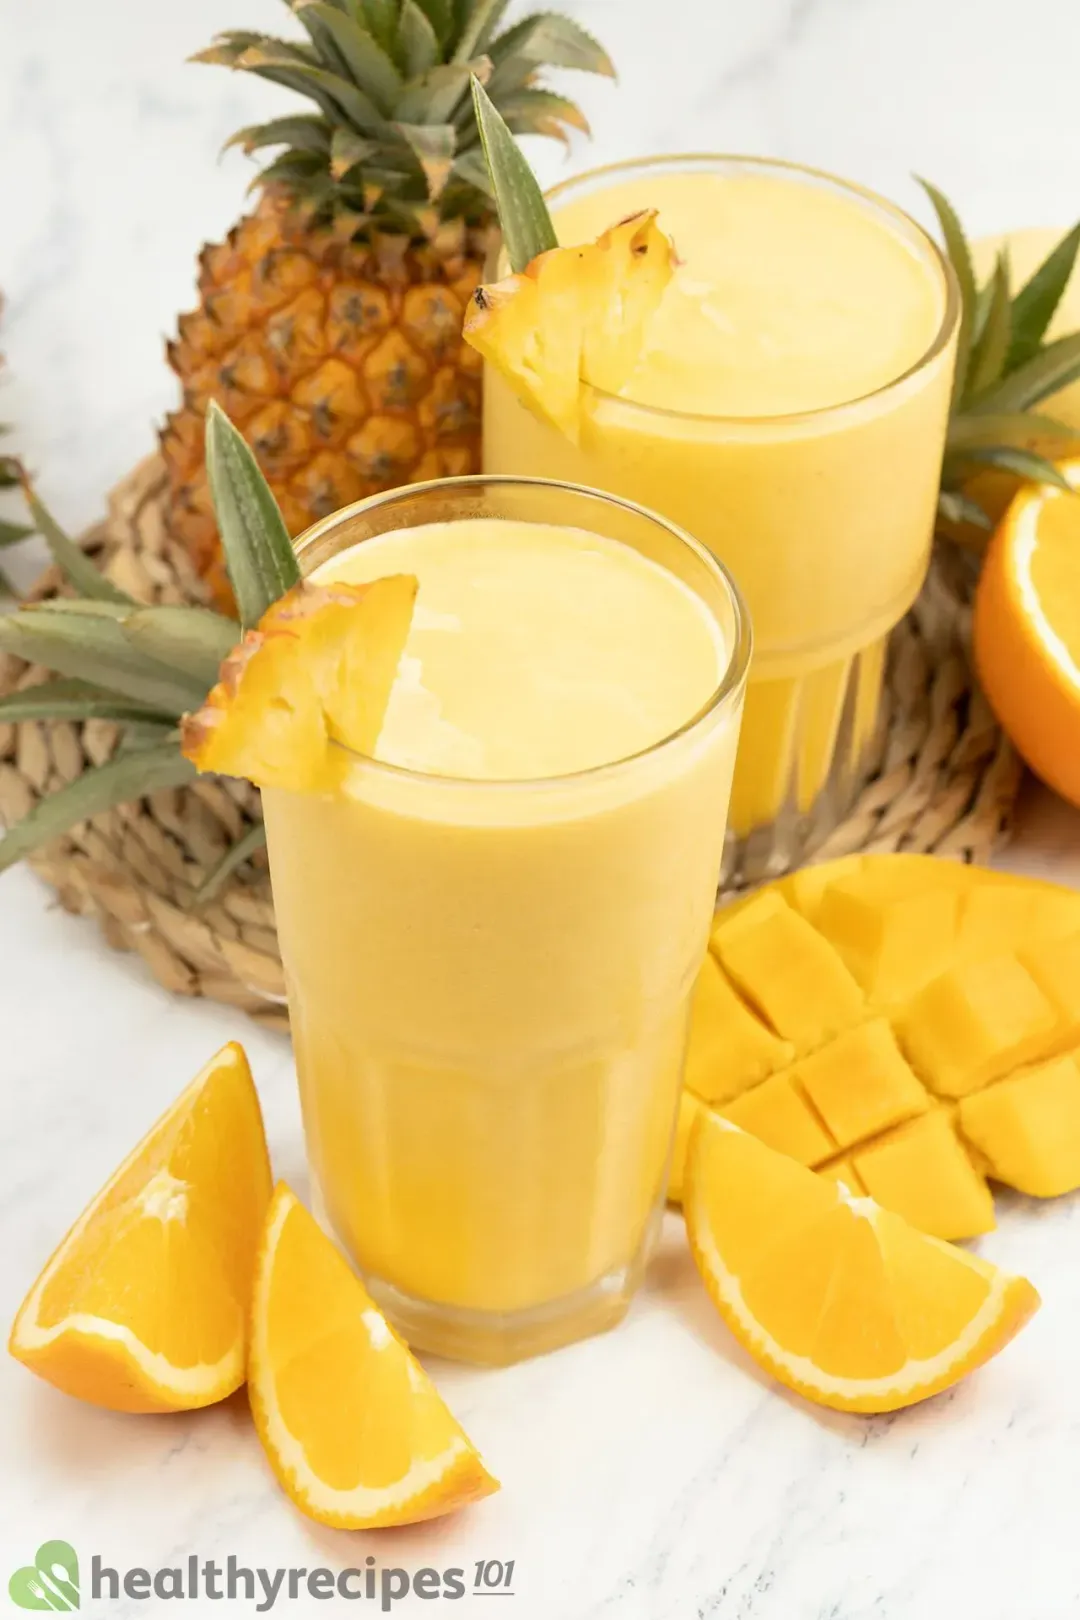 Two glasses of mango smoothie garnished with orange wedges, whole pineapples, and cubed mangoes